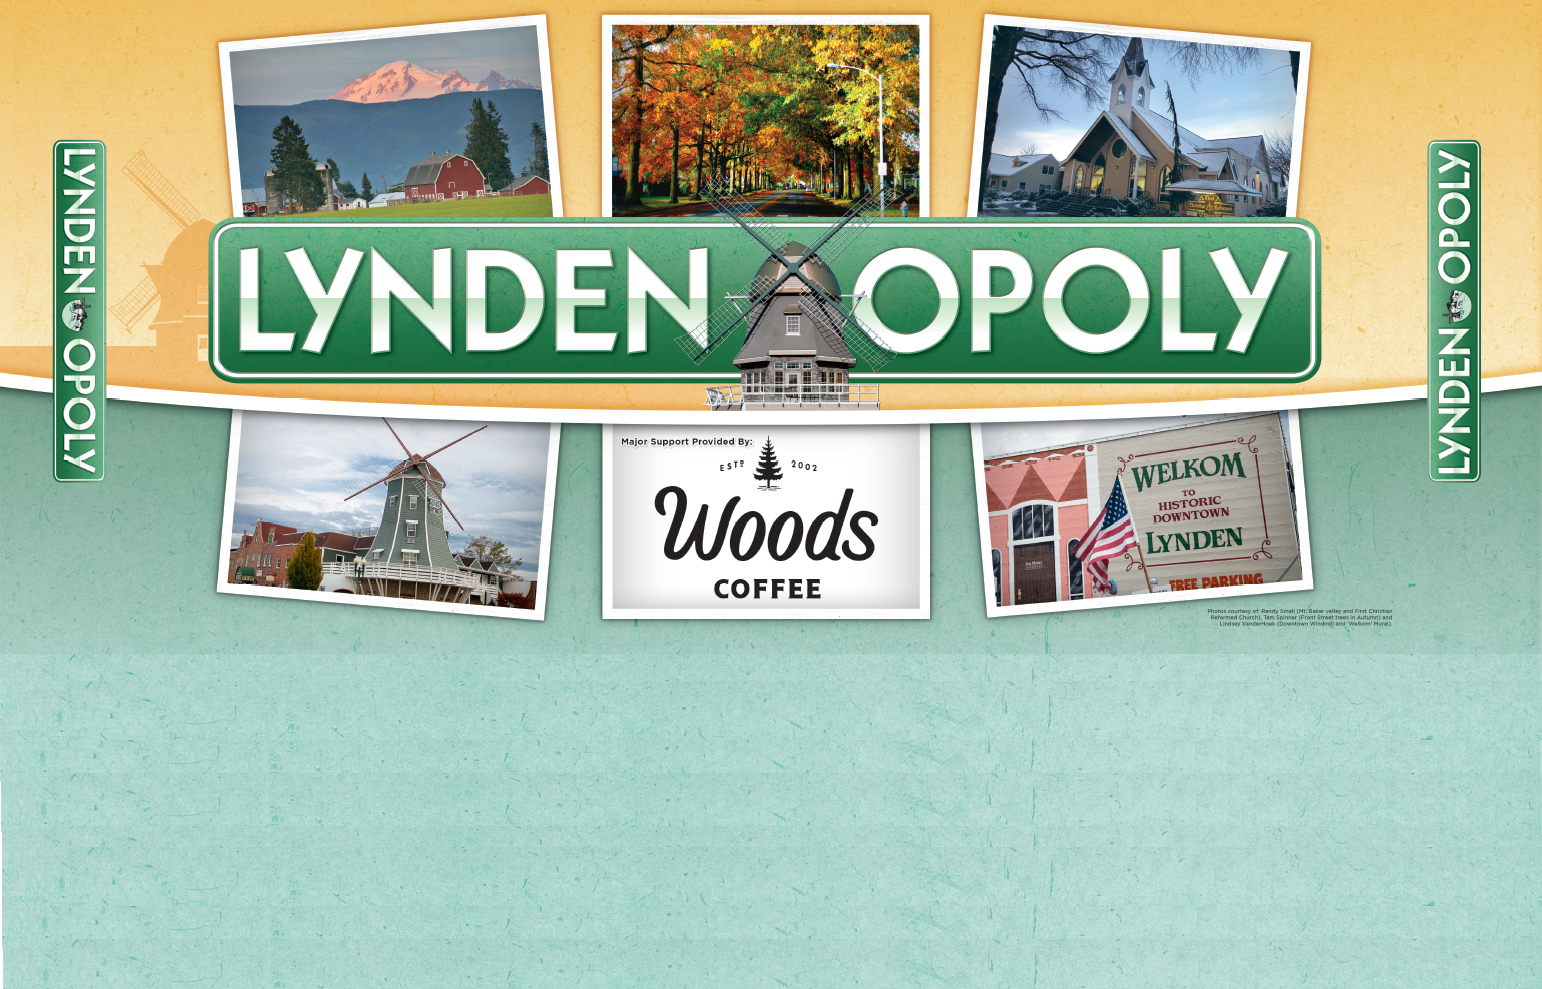 Pre-ordered Lyndenopoly? Here’s what’s next.